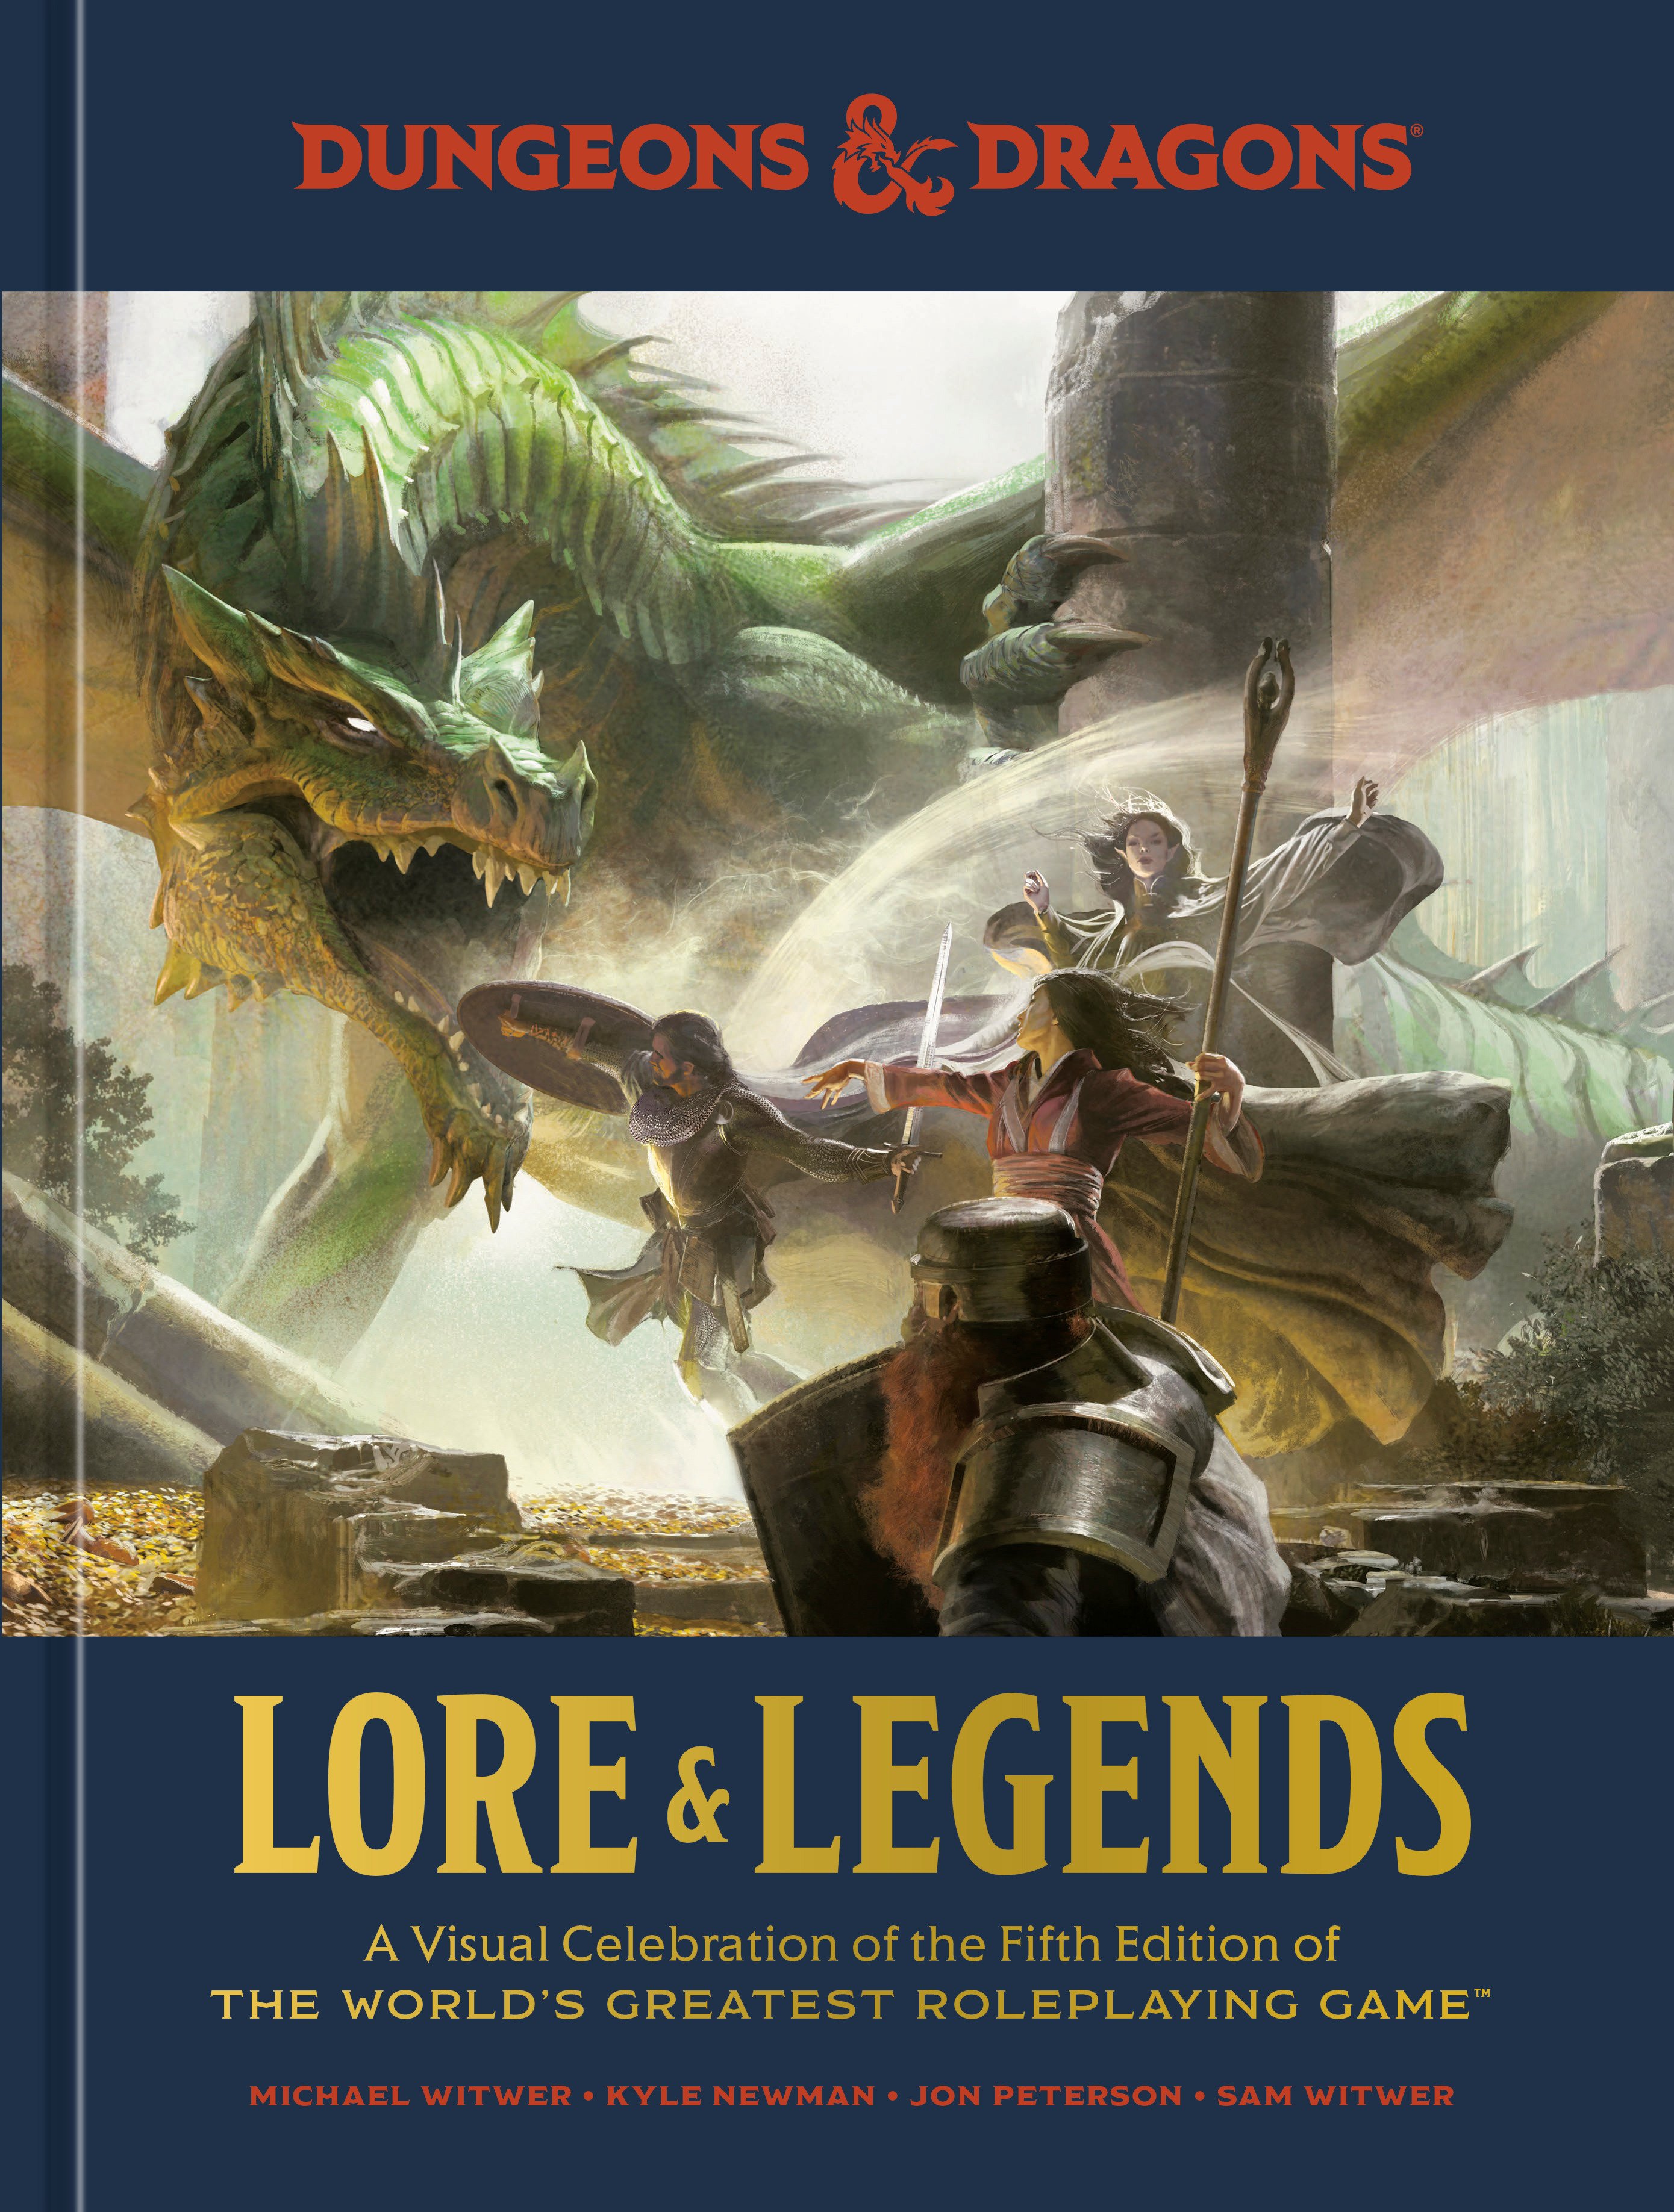 Dungeons & Dragons Hardcover Book Volume 1 Lore & Legends